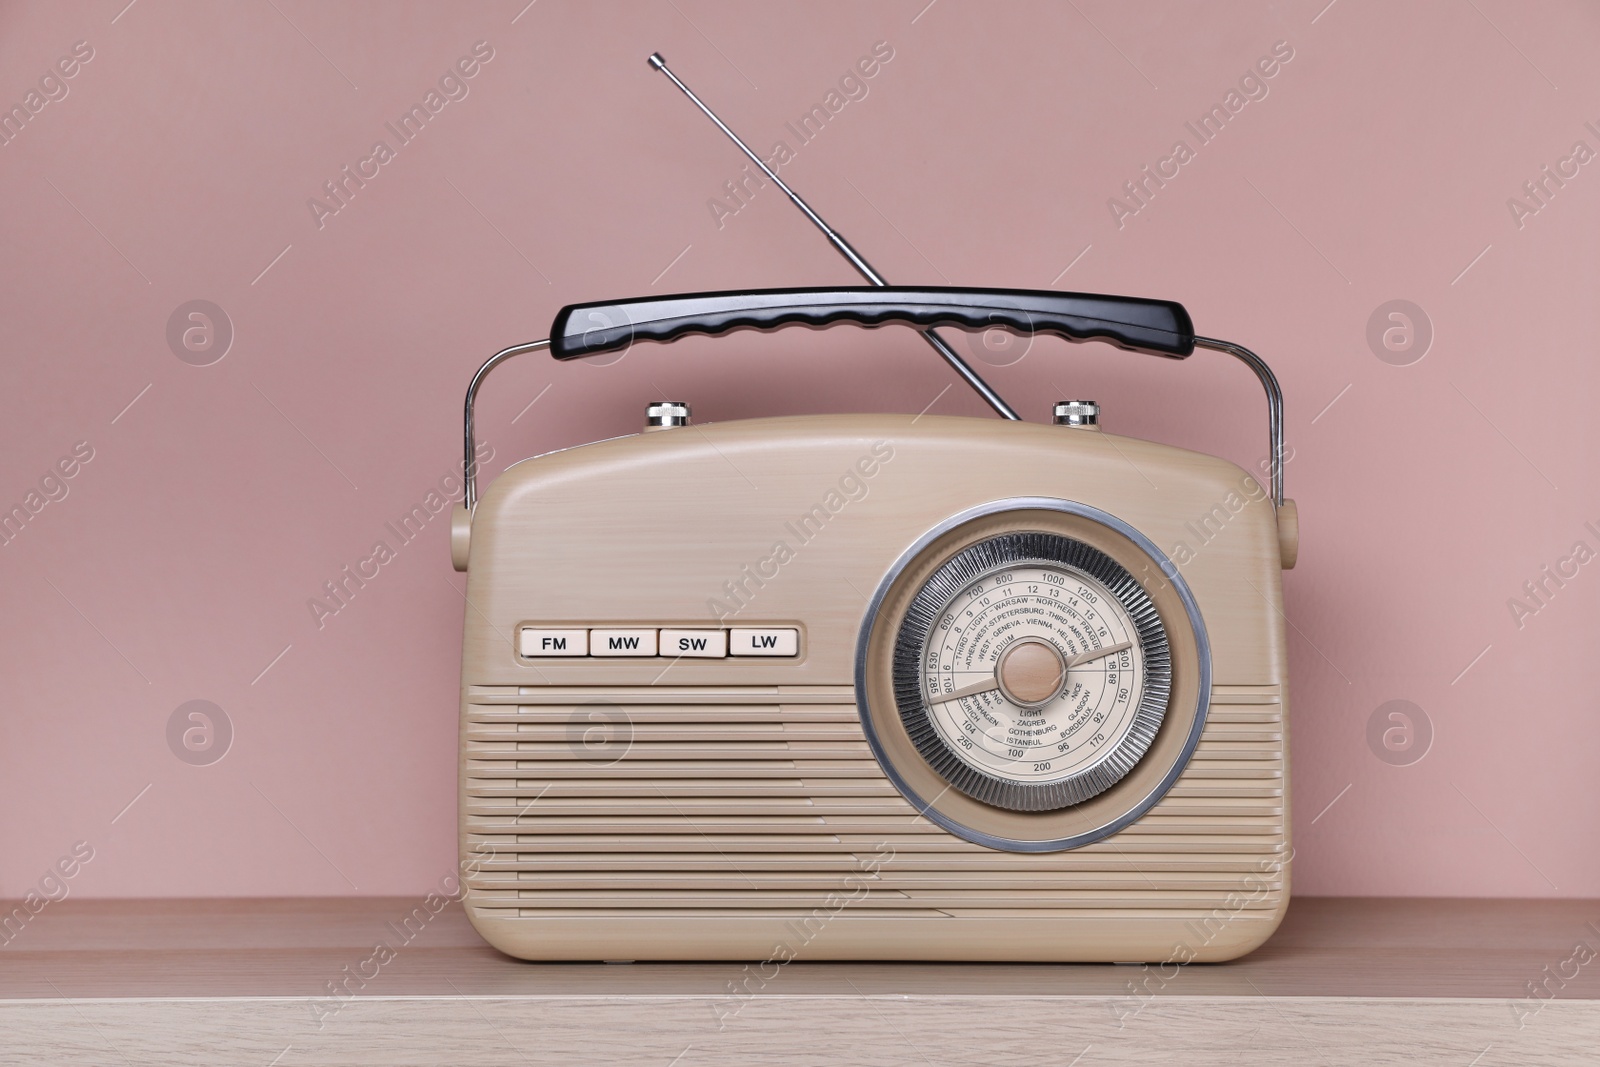 Photo of Retro radio receiver on wooden table against pink background